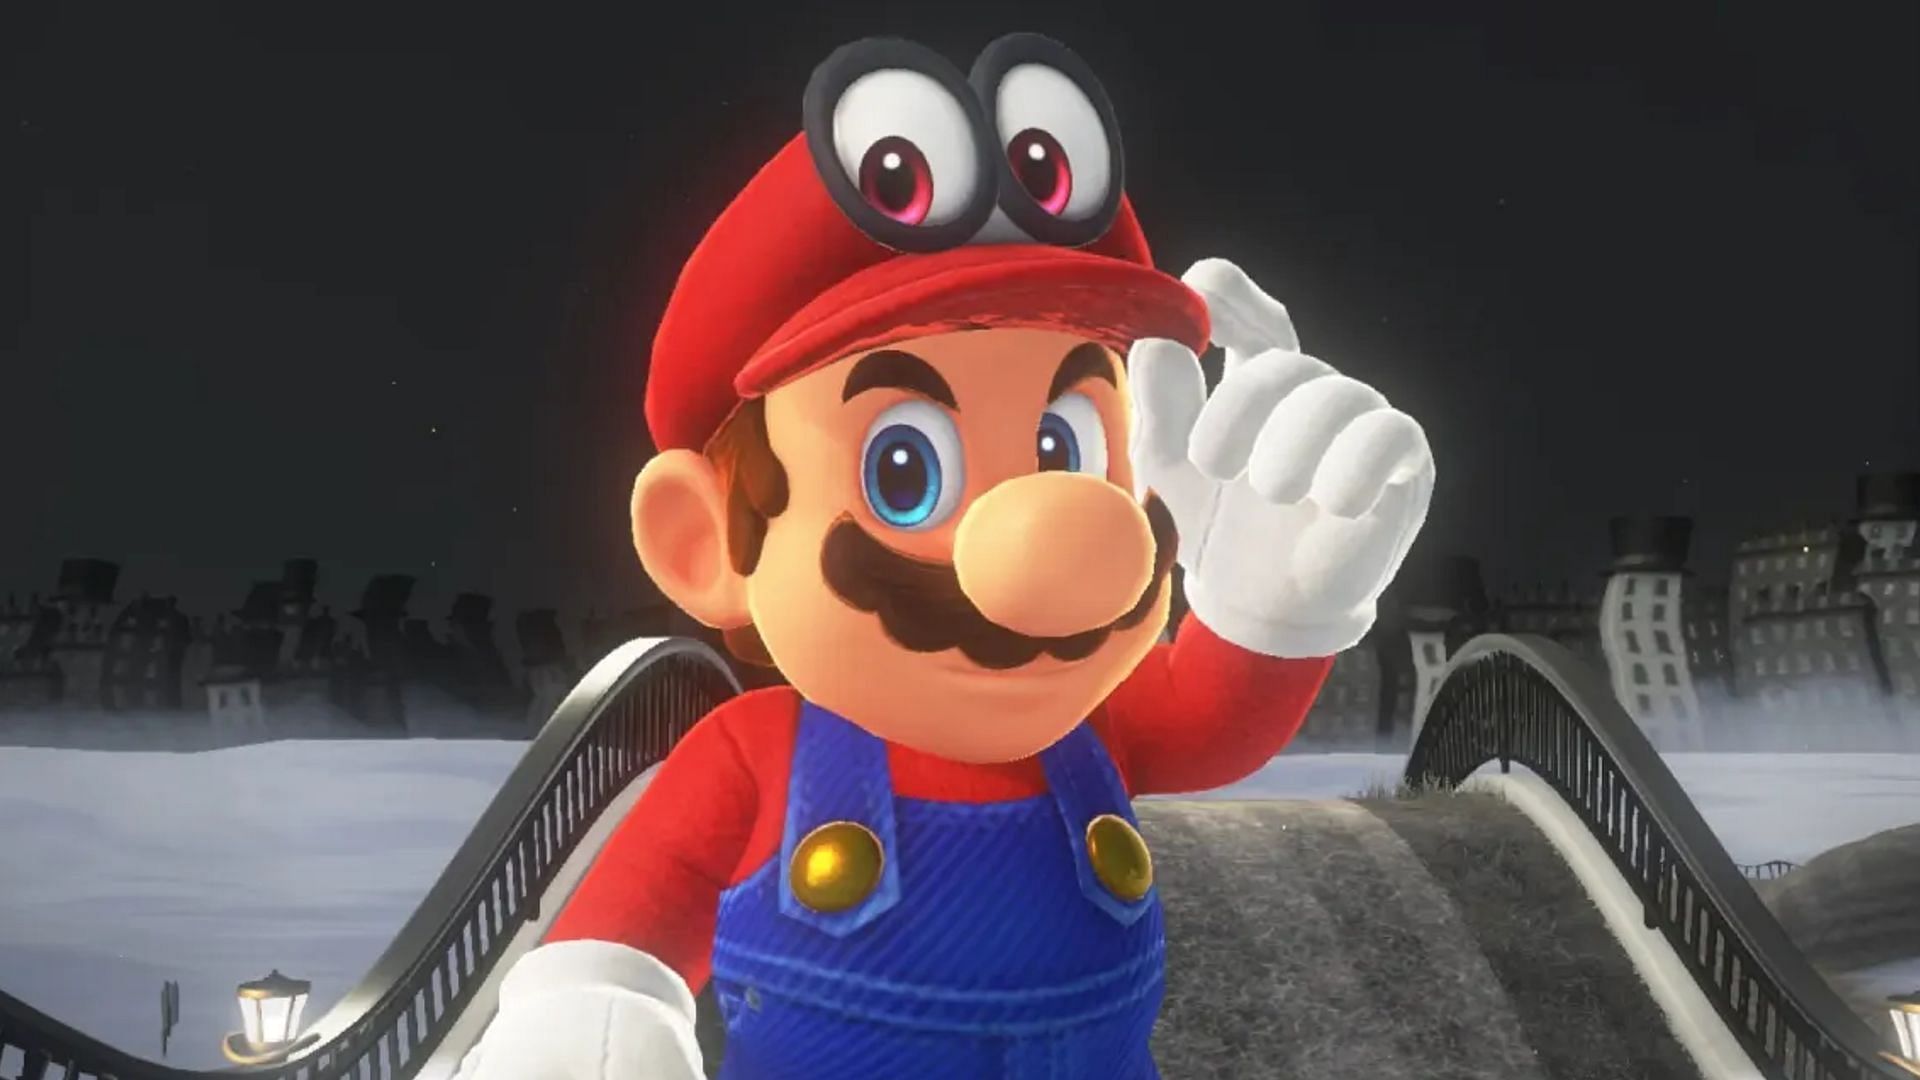 Mario games are usually one of the first things that players think about when it comes to platformers